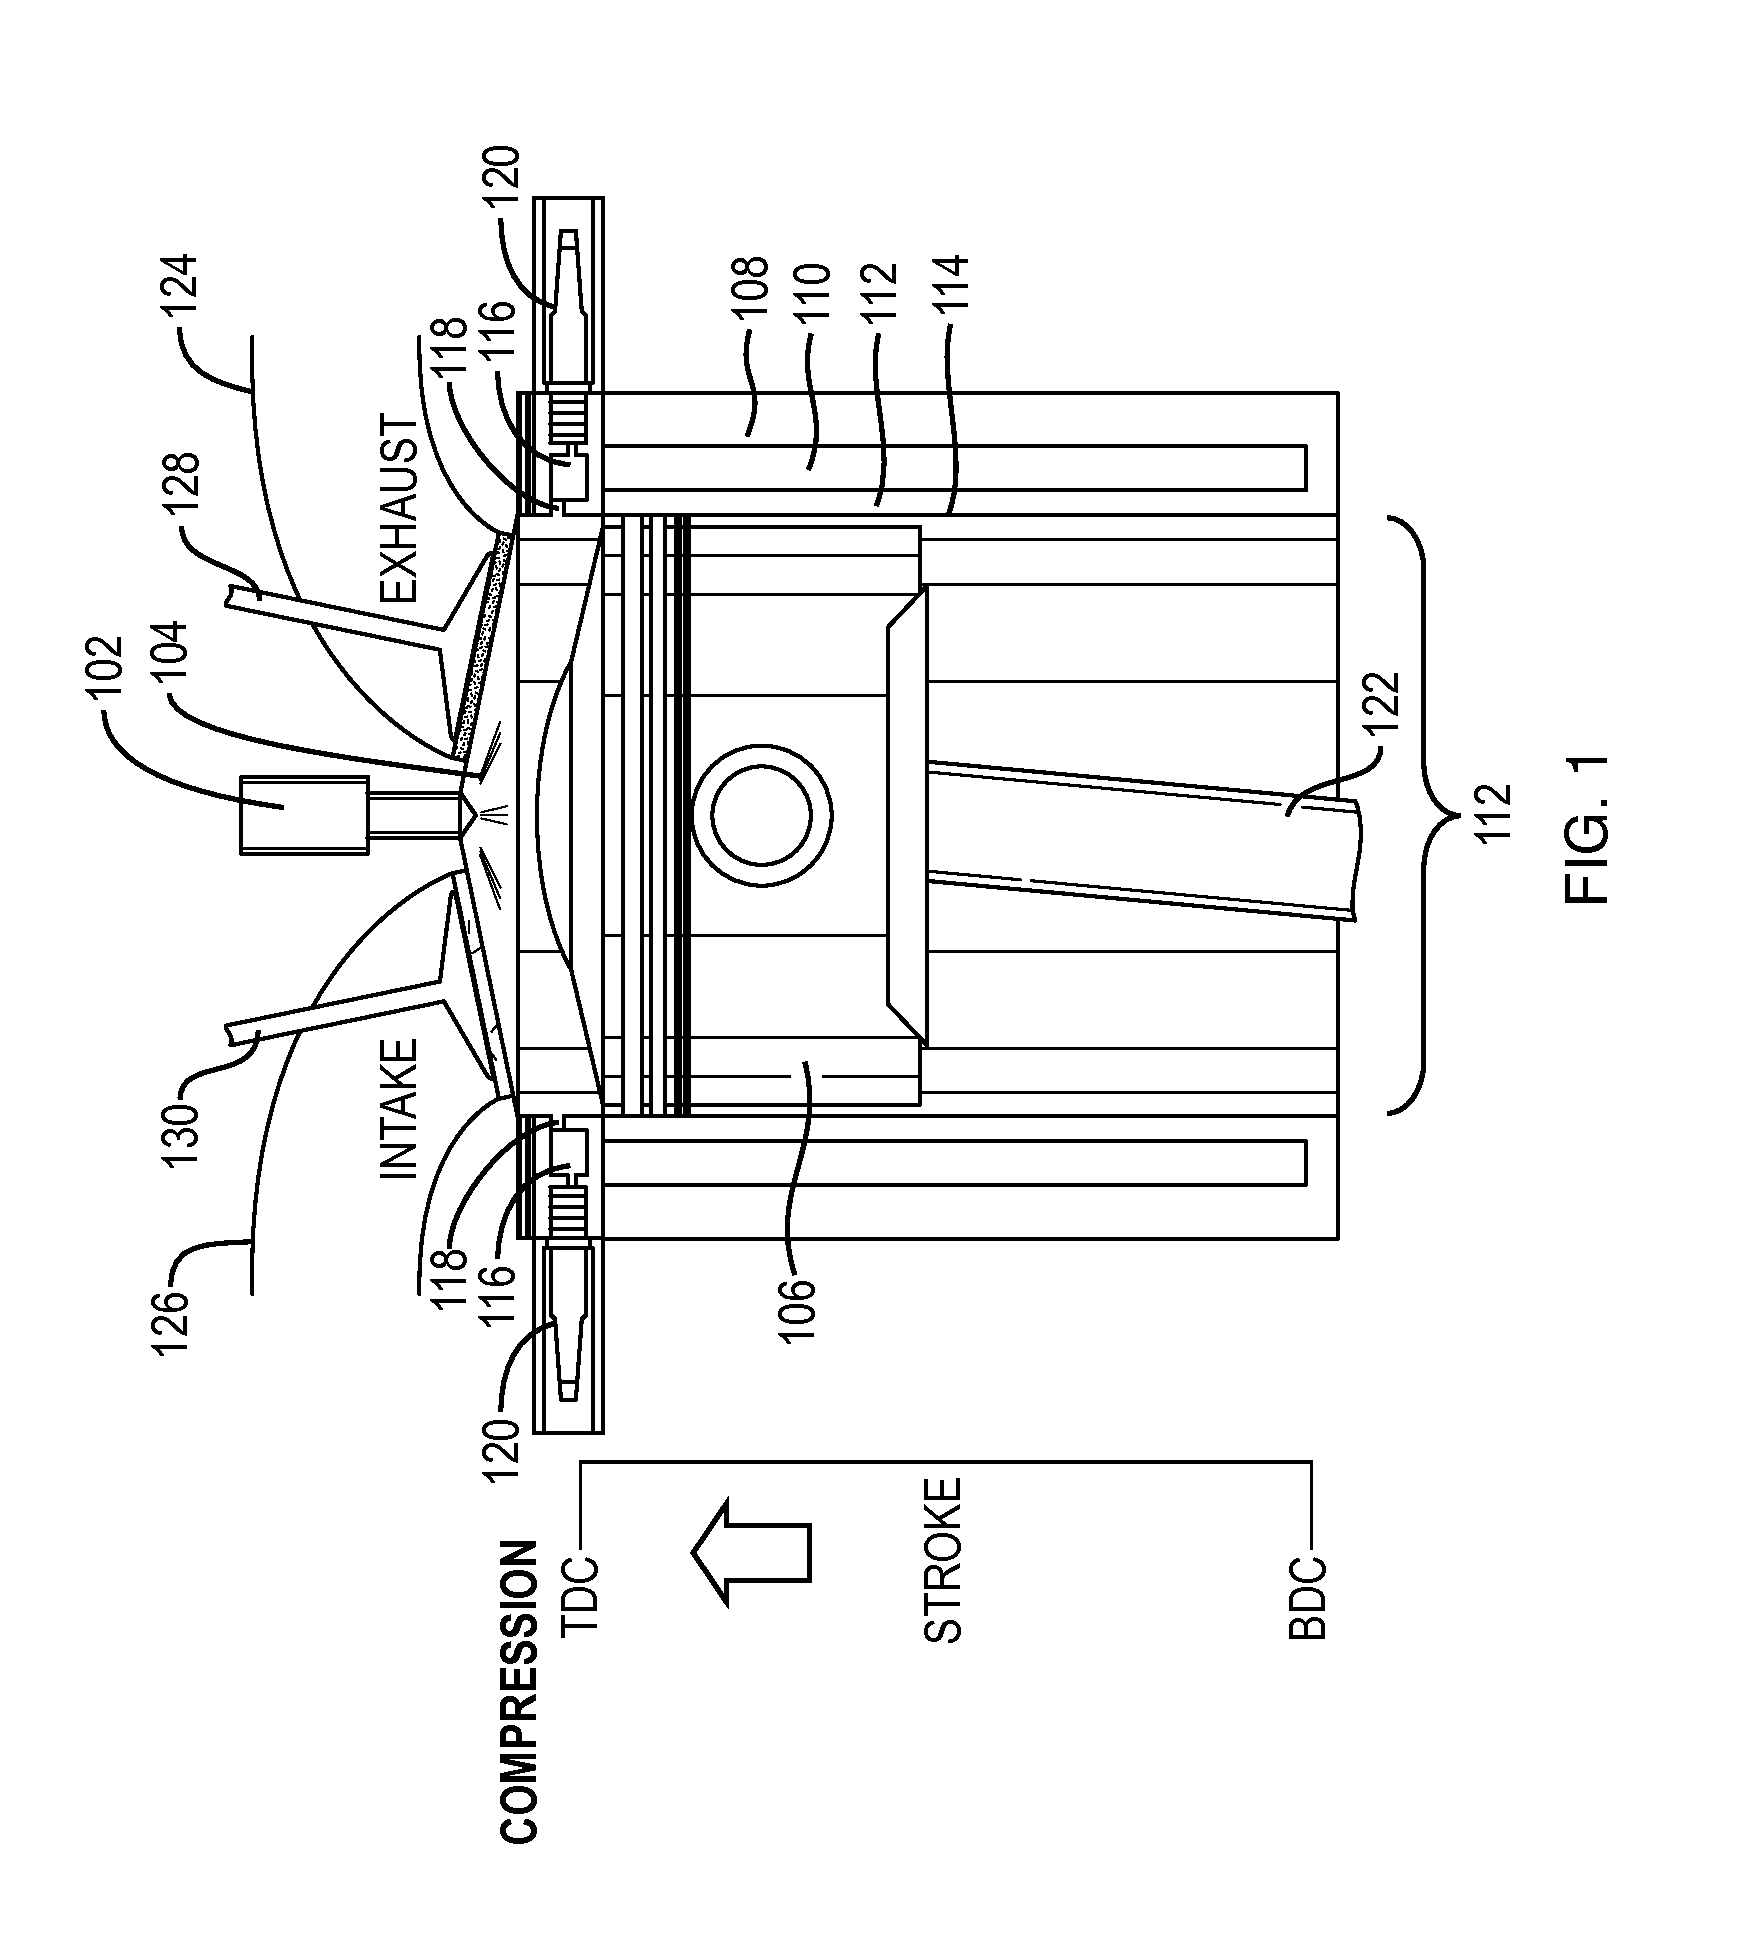 Dual pre-chamber combustion system